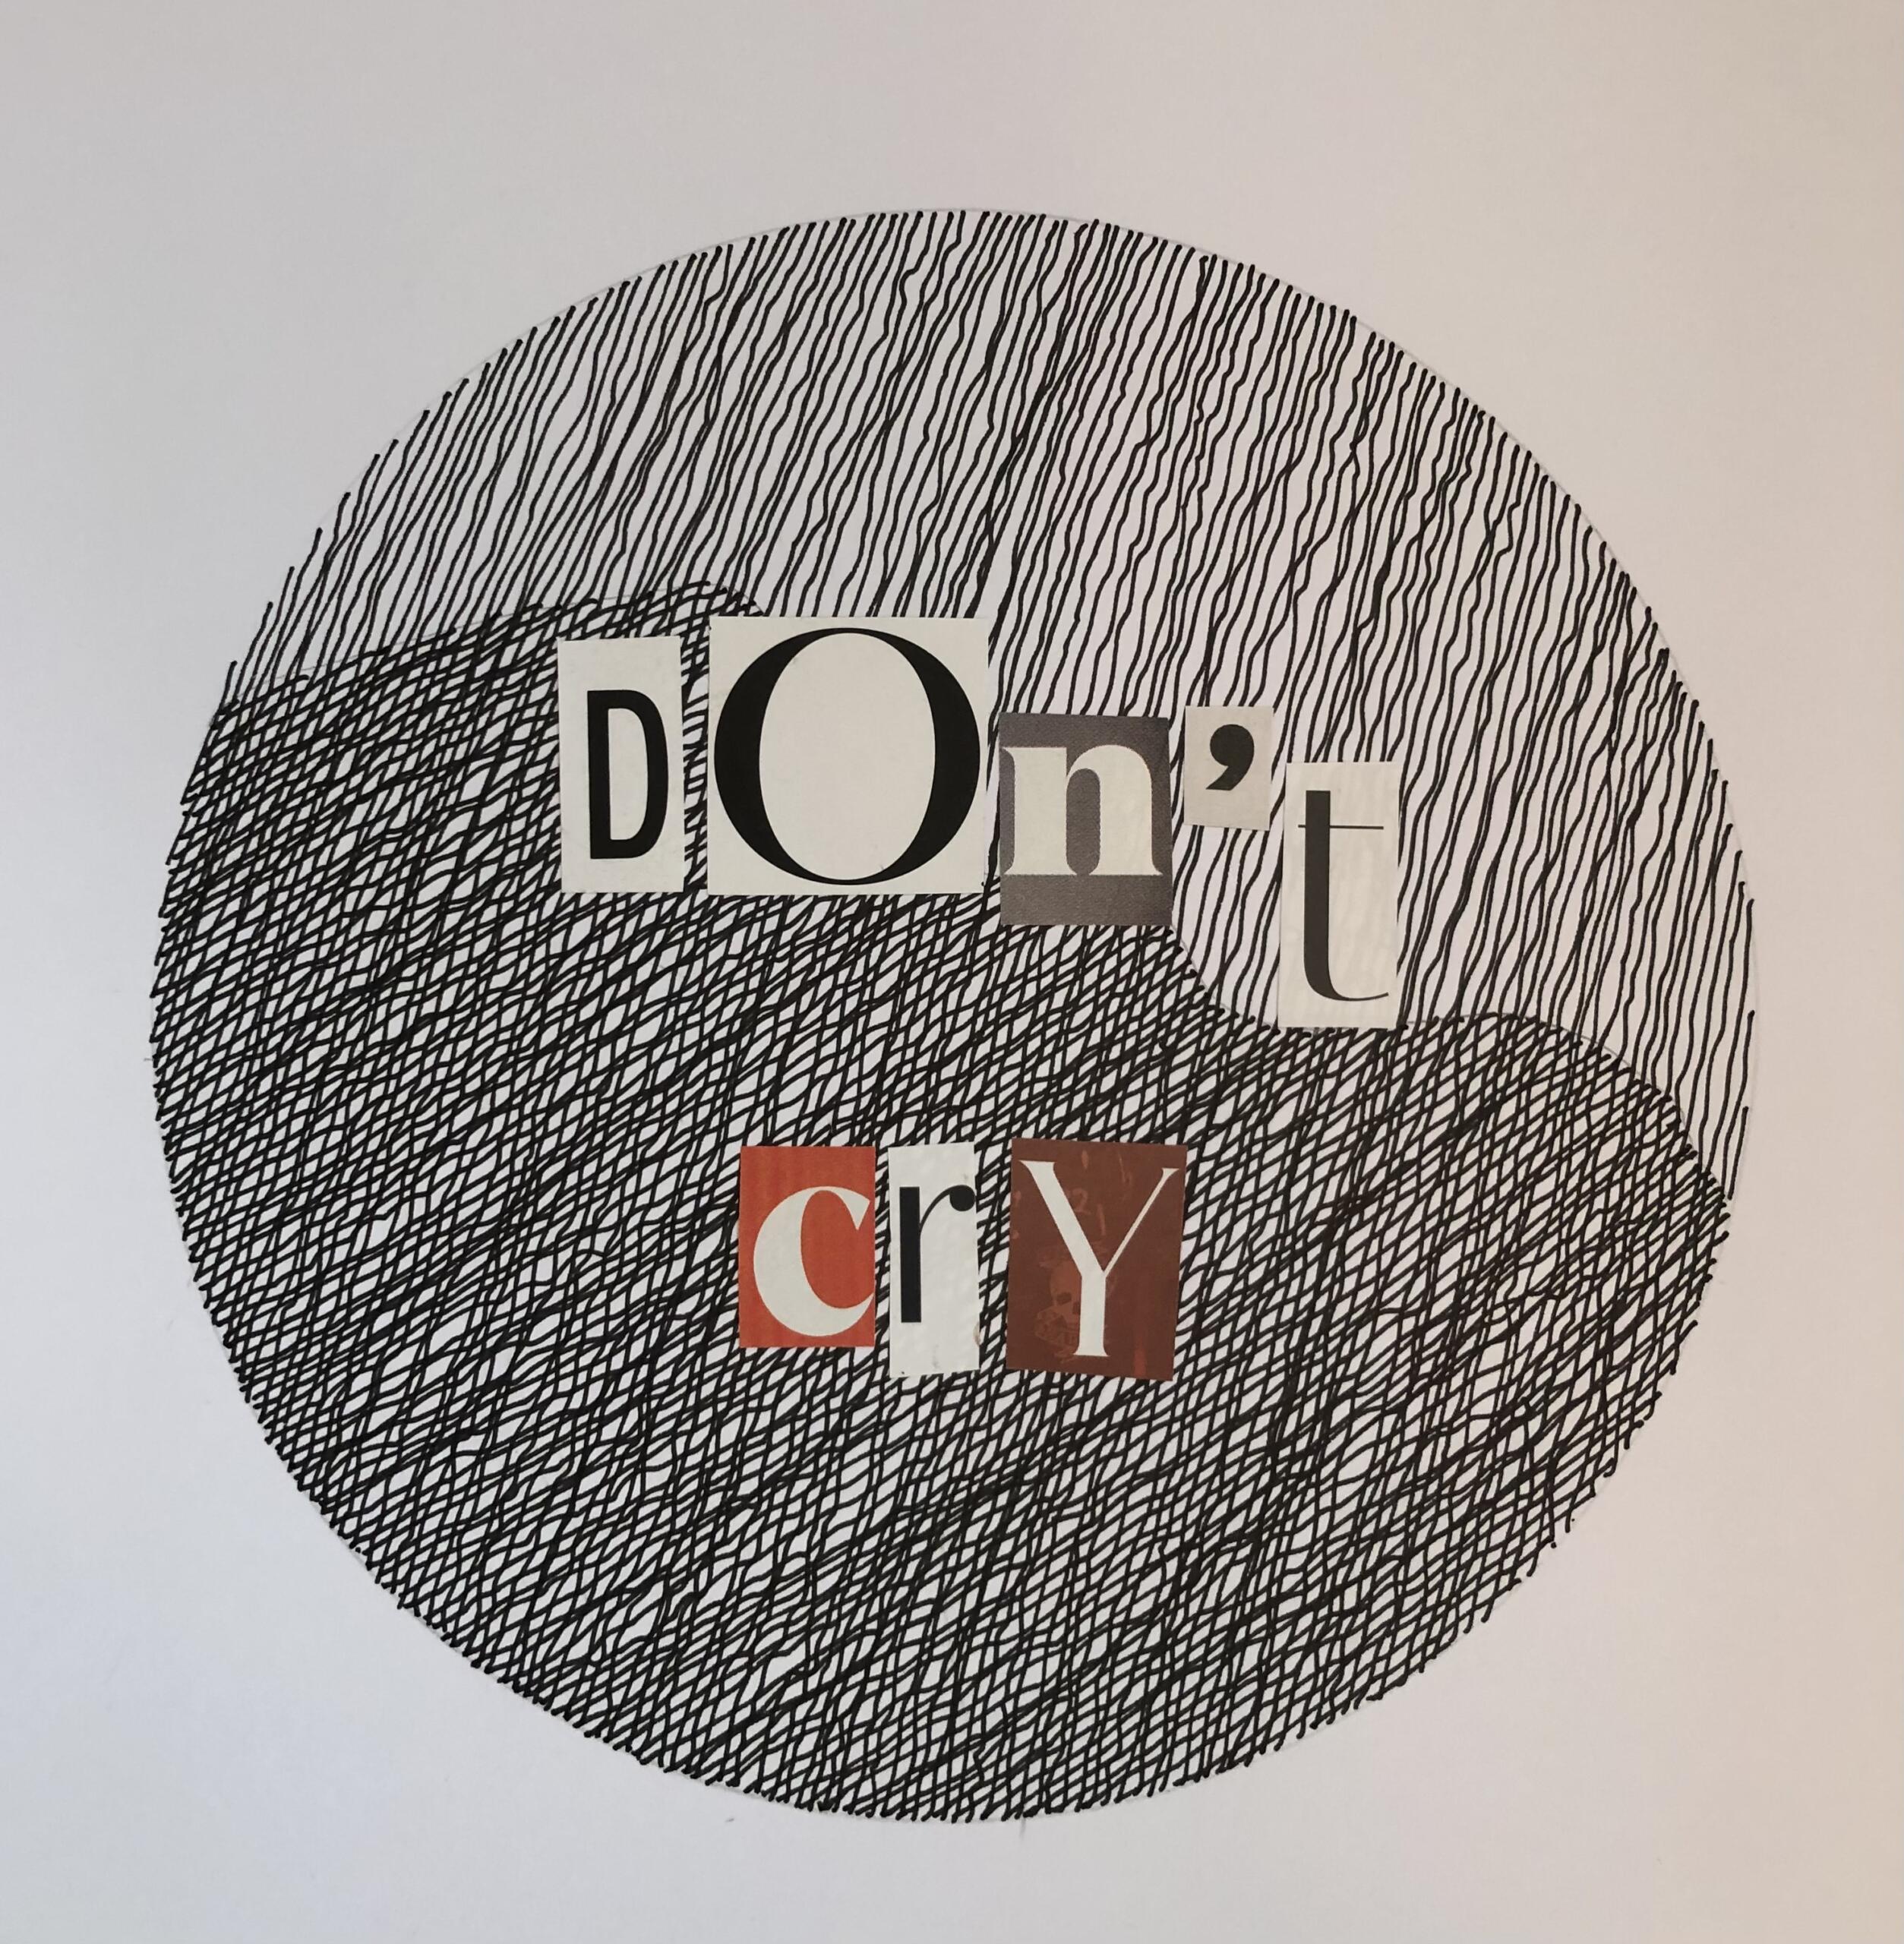 An abstract drawing of circles and lines, with letters cut in various styles collaged over that reads "don't cry"